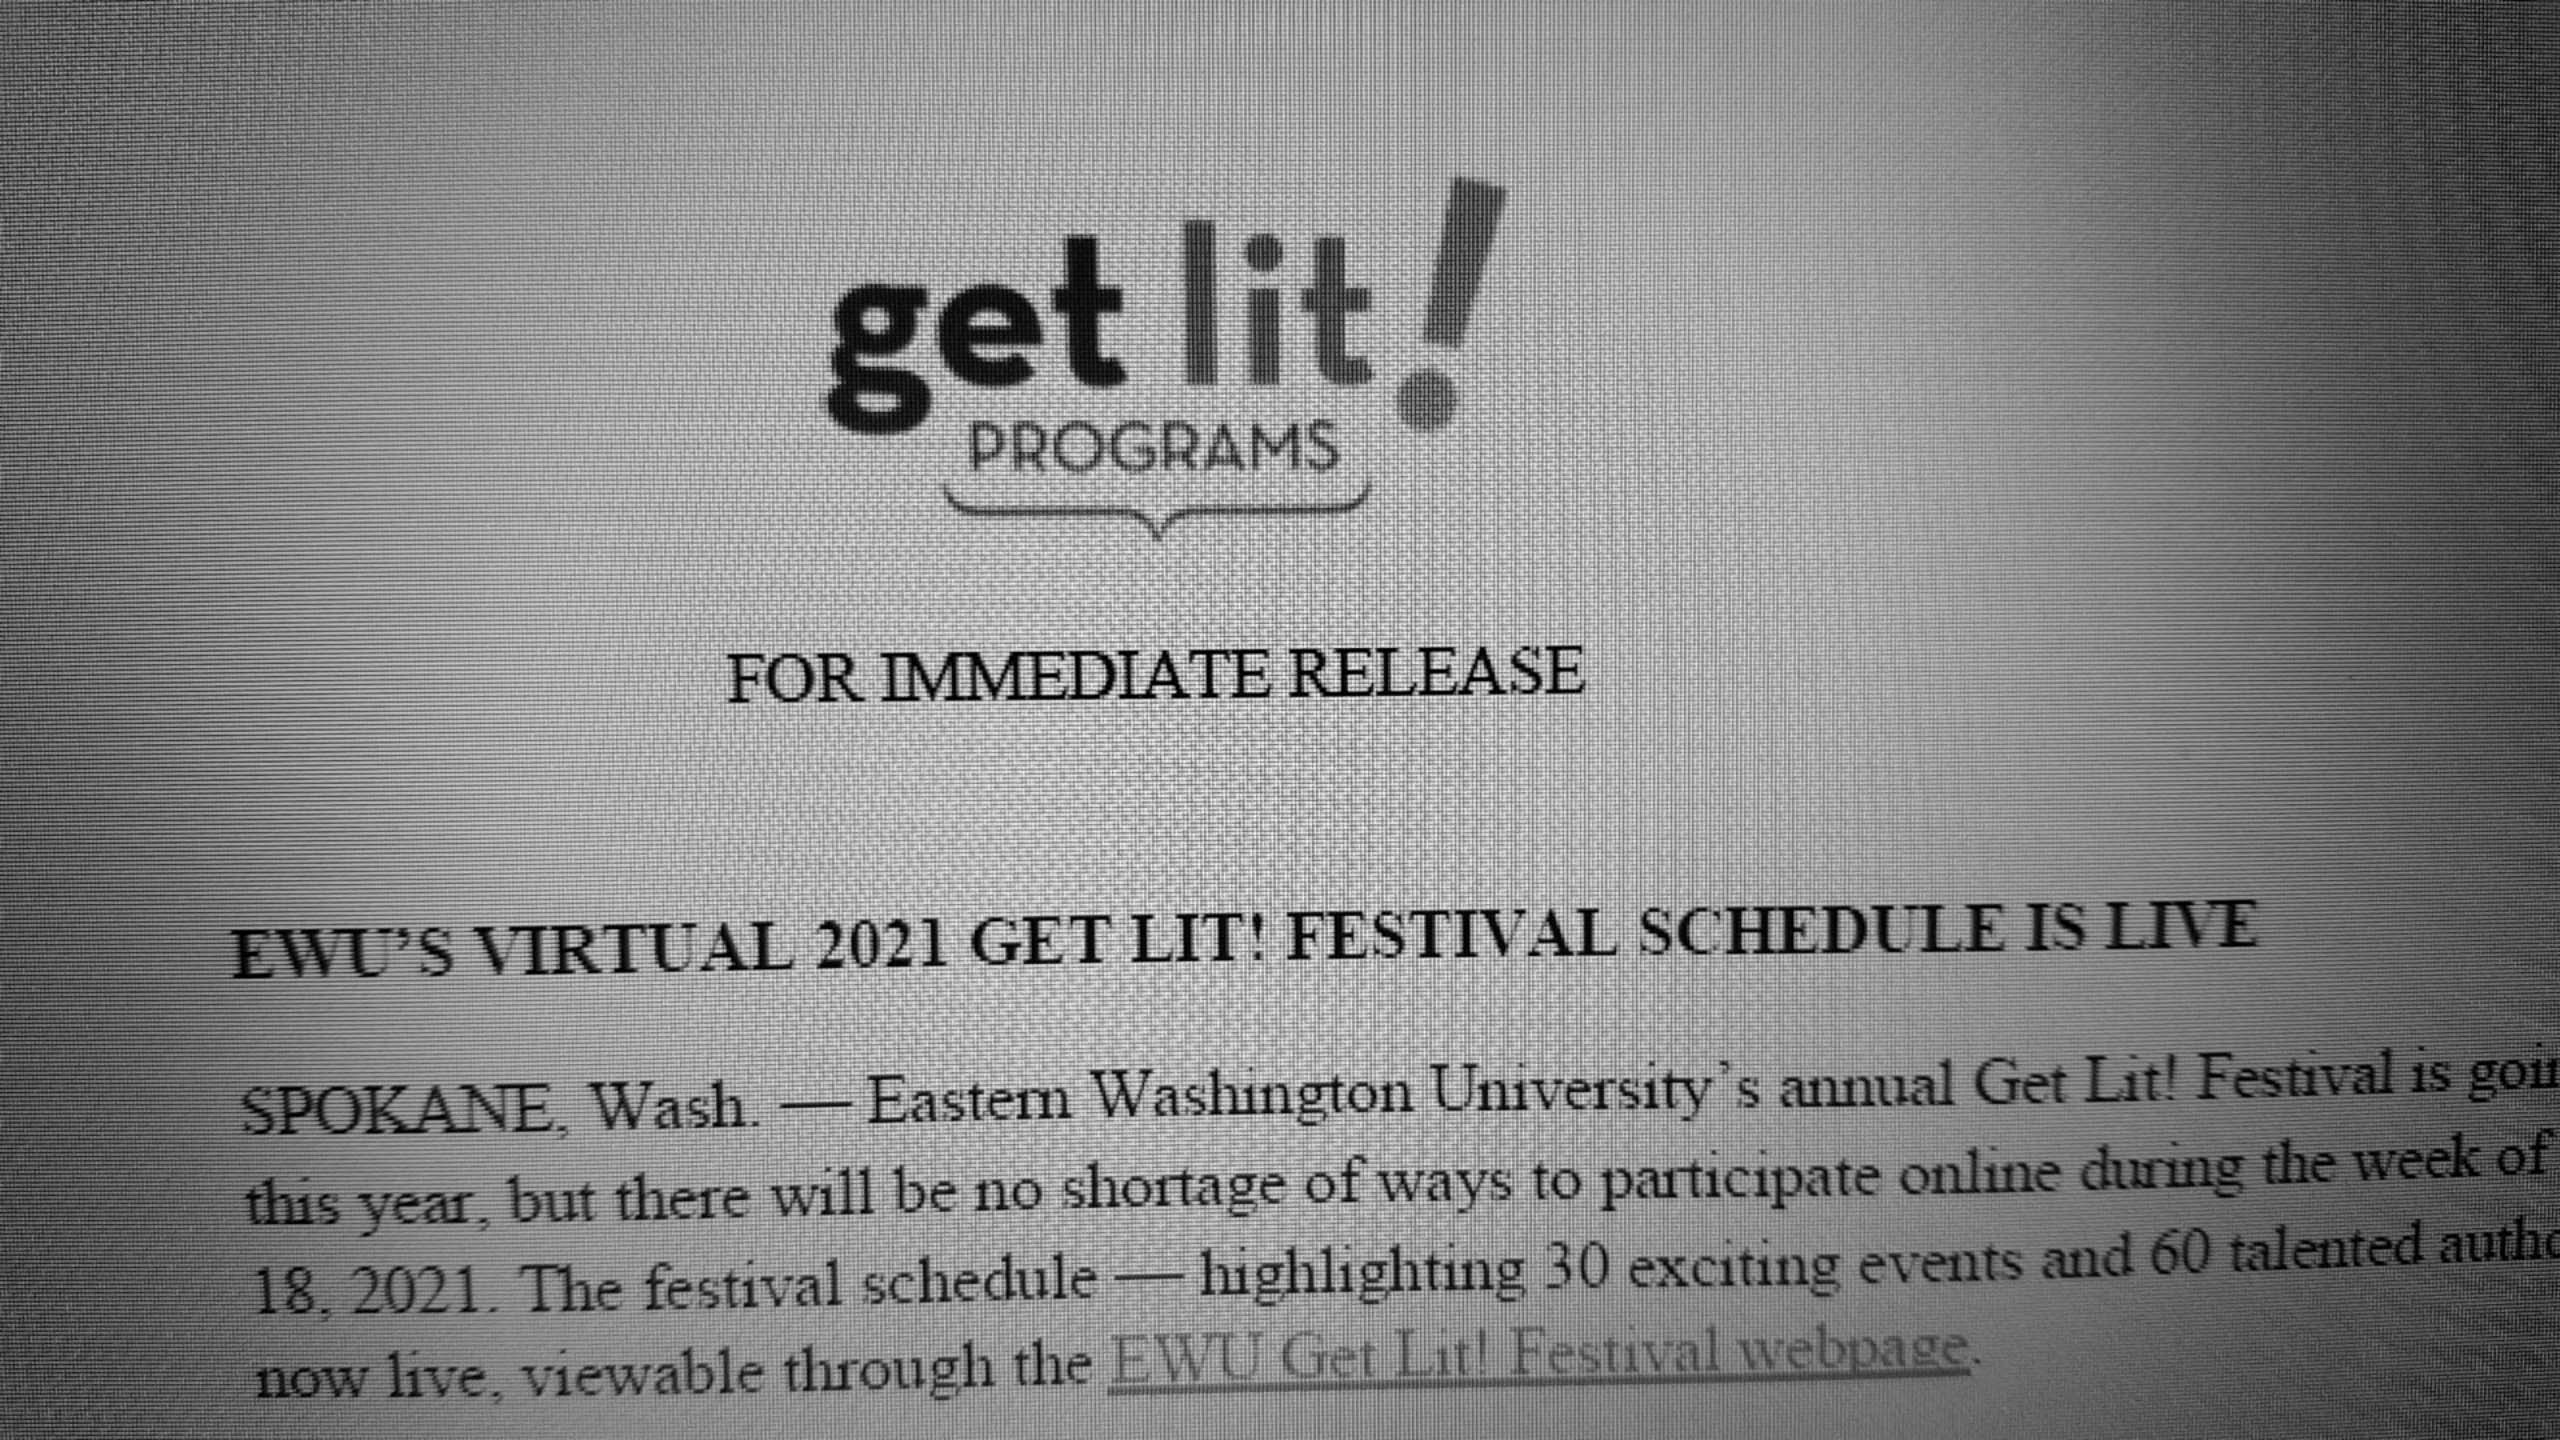 black and white picture of a computer screen with the 'get lit! organization's logo, referencing the press release